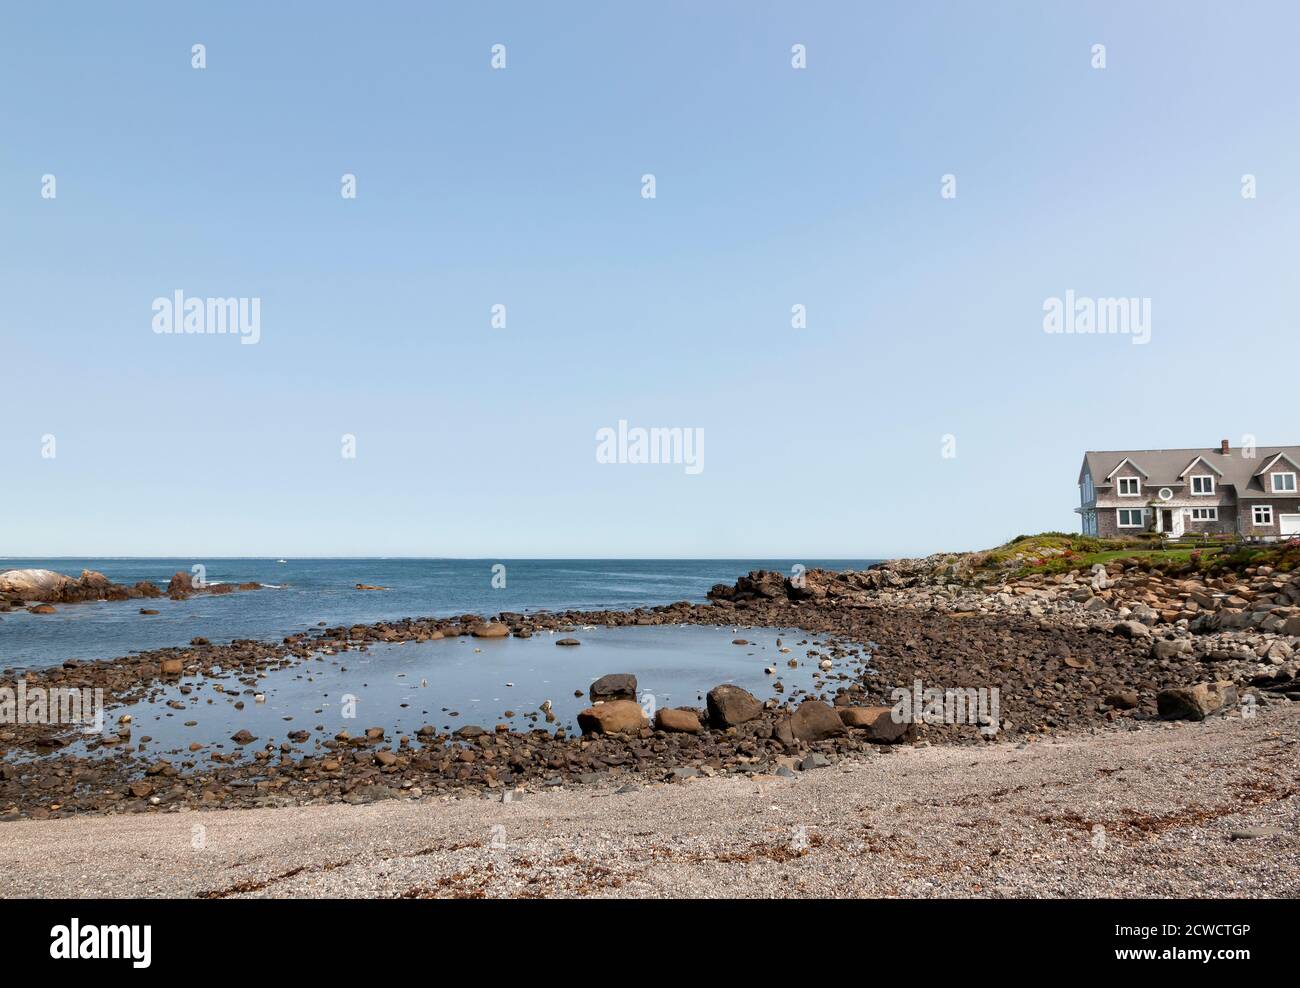 Tidal pool or rock pool at low tide in Ogunquit, Maine. Stock Photo